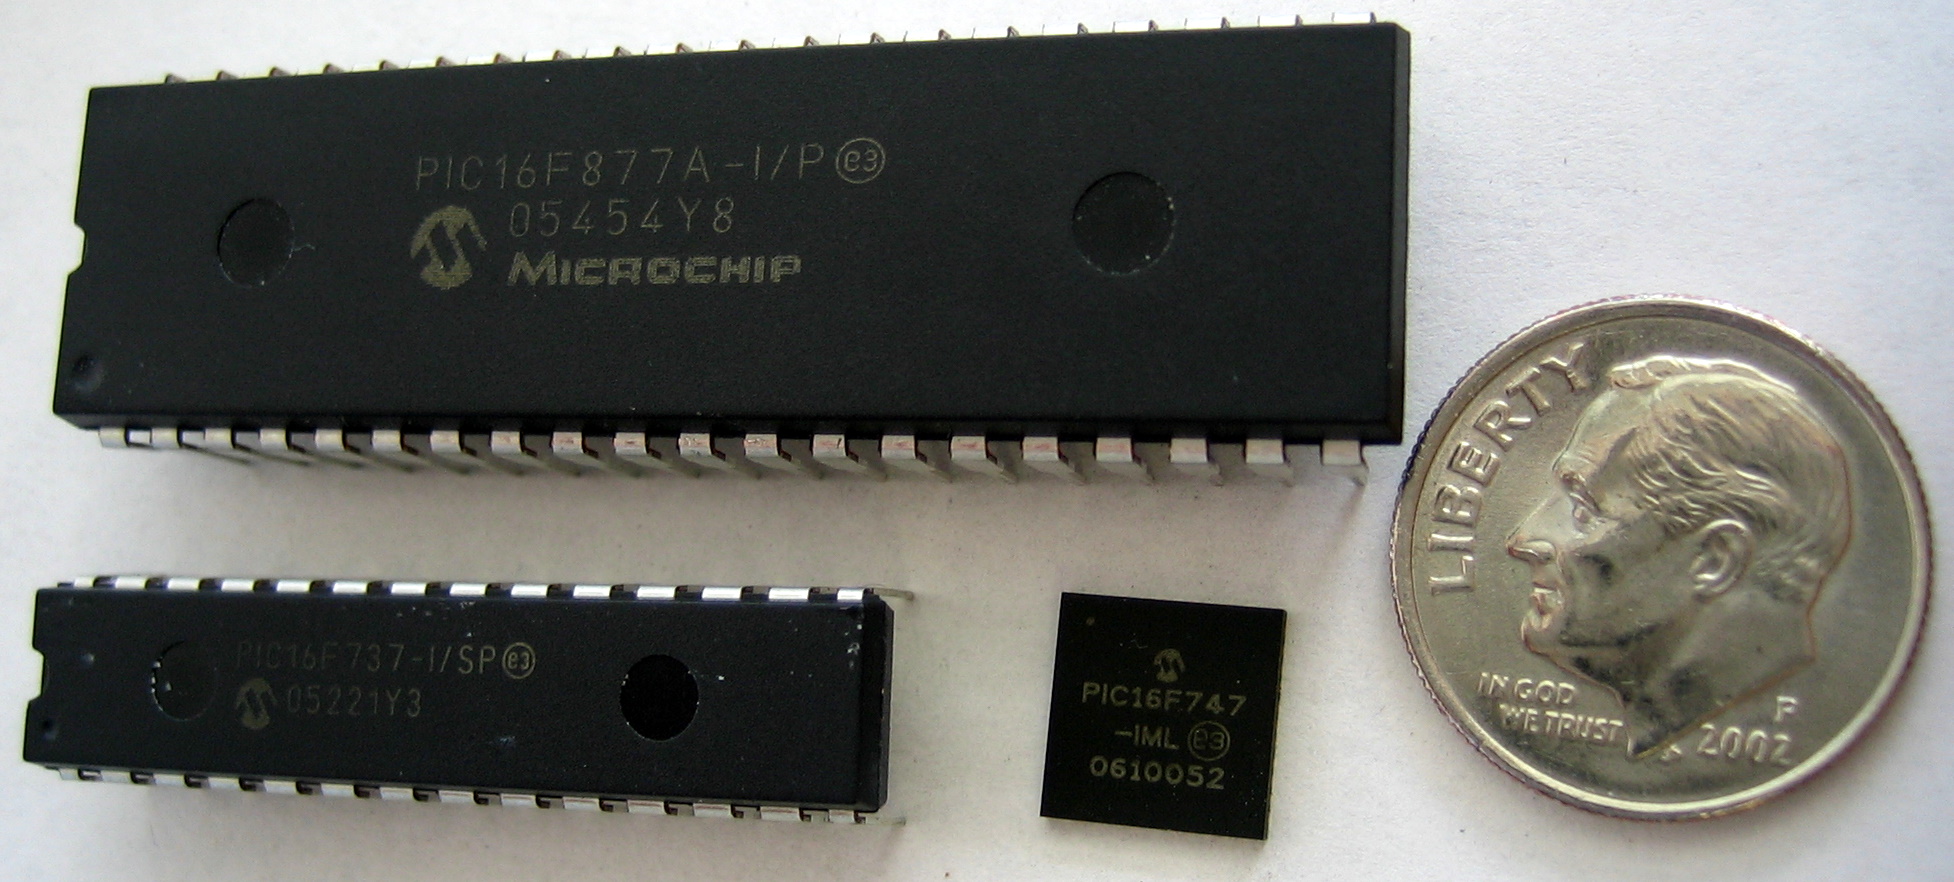 pic microcontroolers